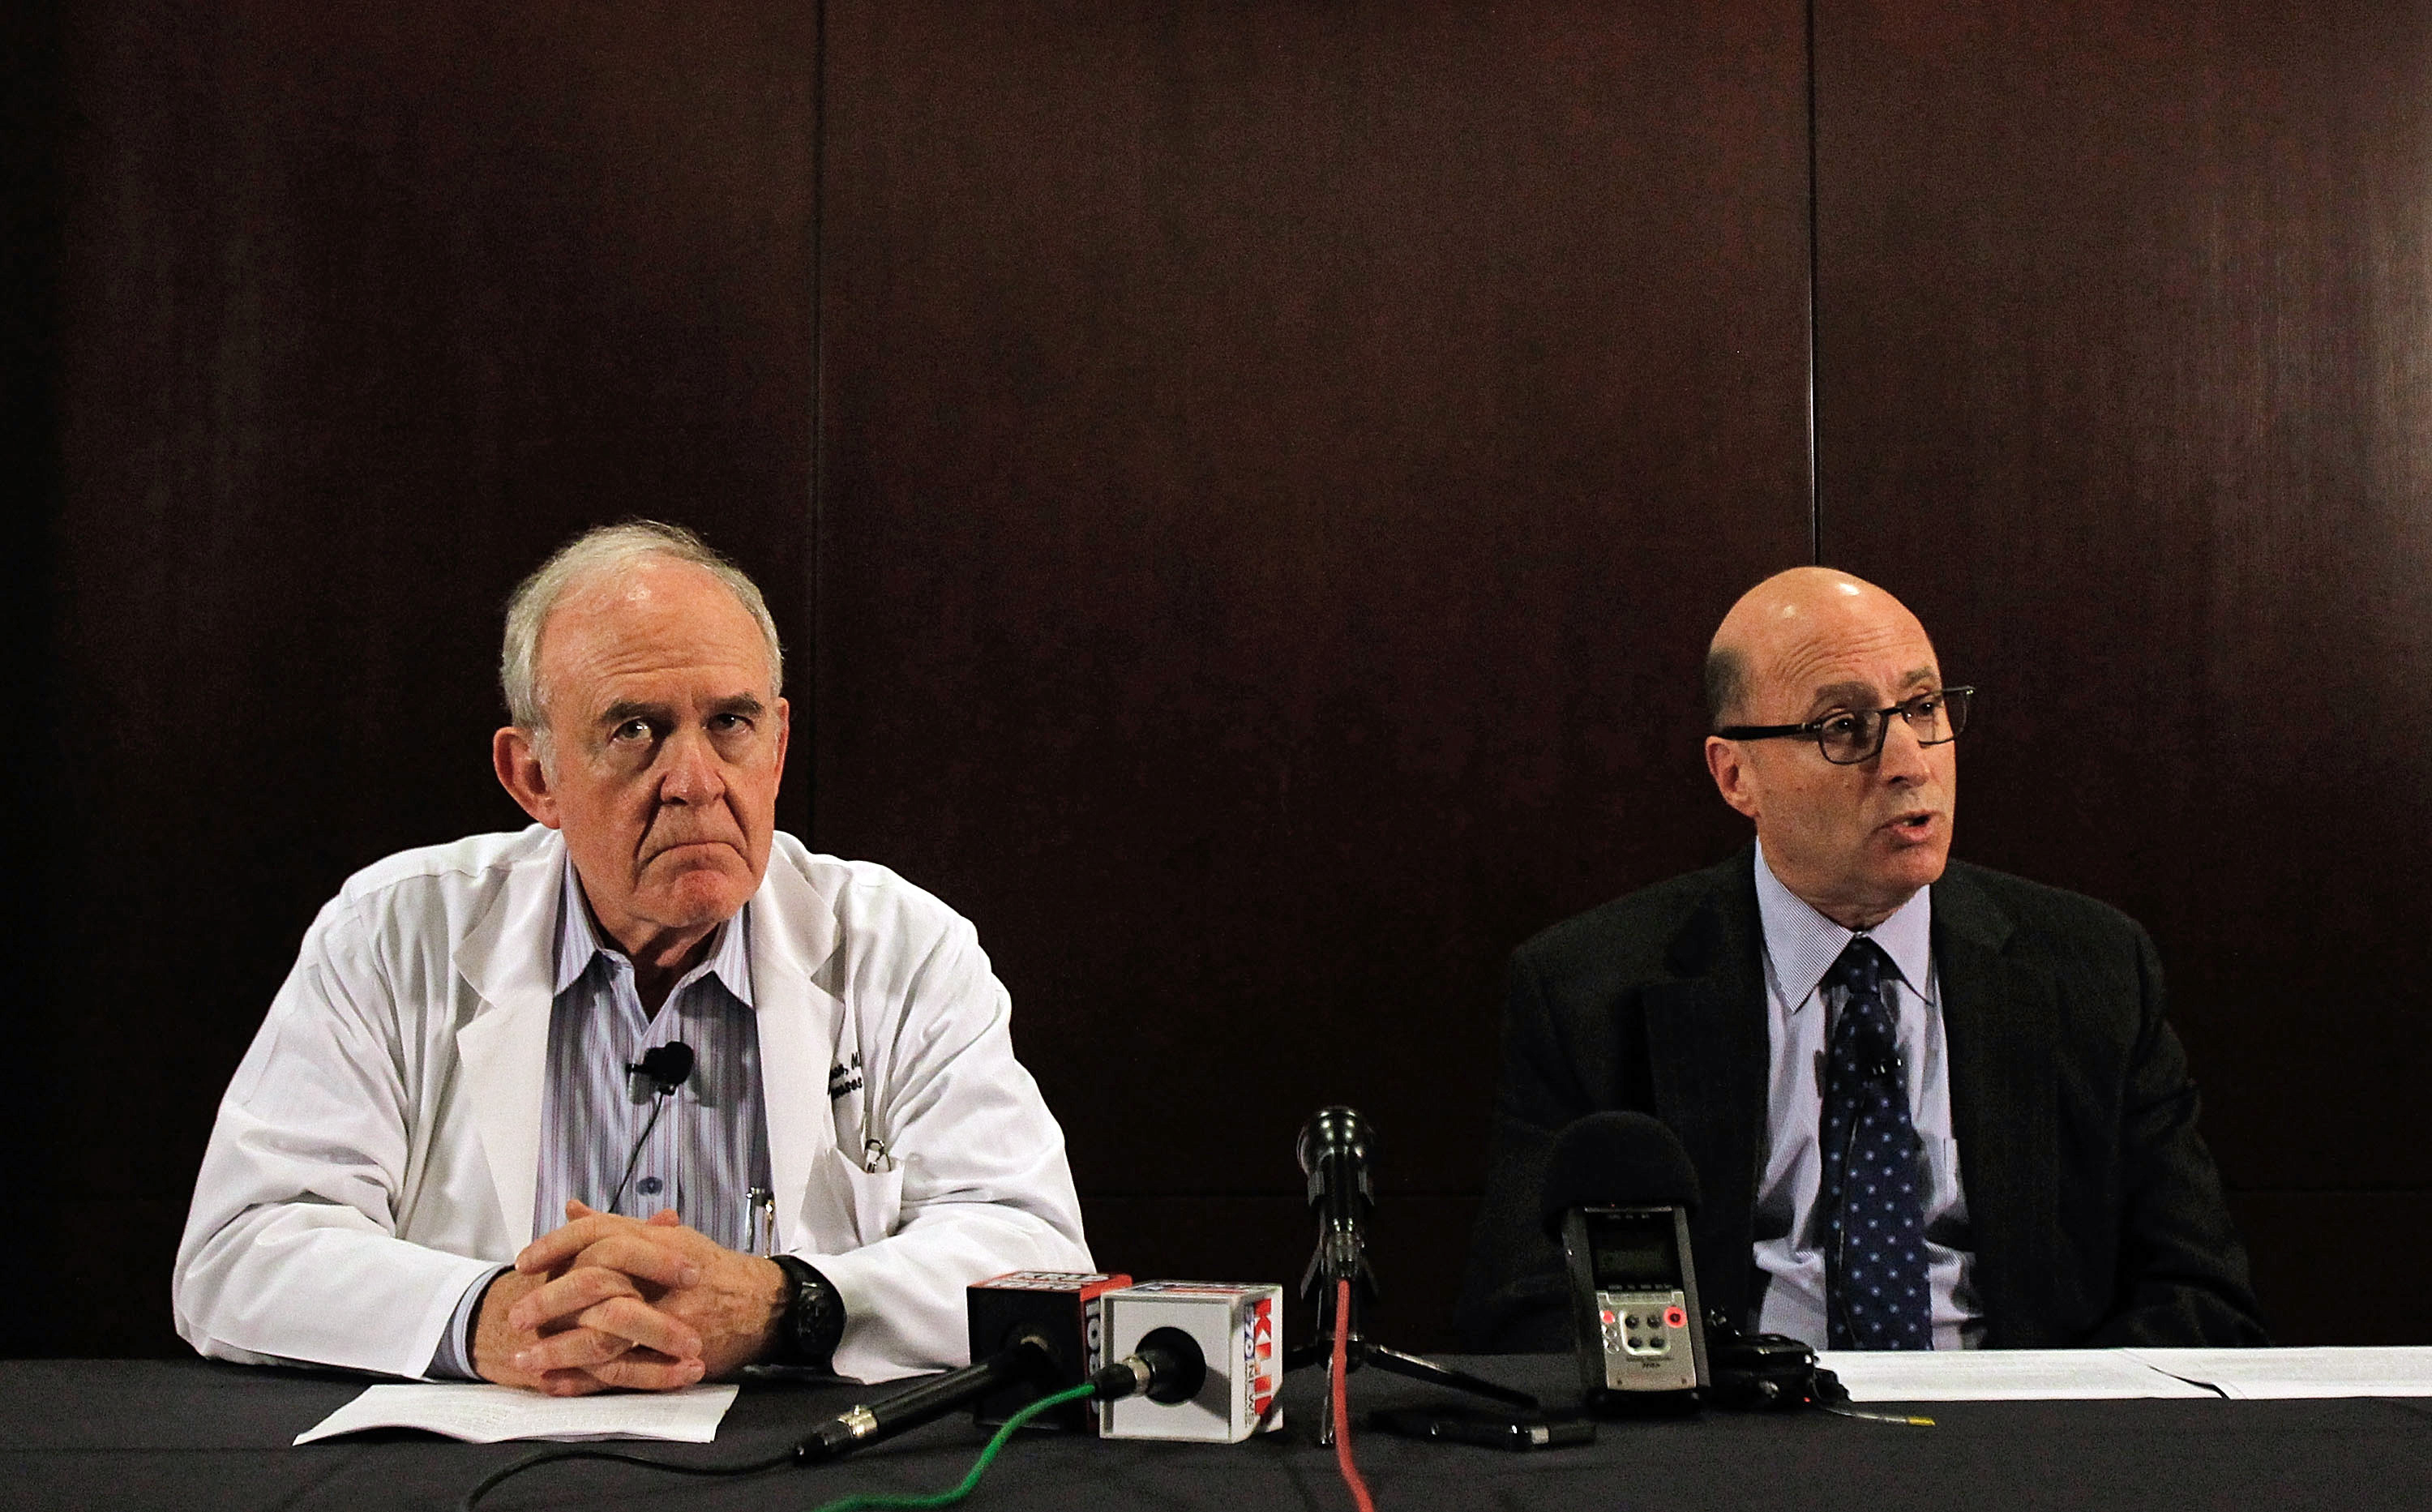 Dr. Edward Goodman, epidemiologist at Texas Health Presbyterian Hospital Dallas, and Dr. Mark Lester, Southeast Zone clinical leader for Texas Health Resources, answer questions during a media conference at Texas Health Presbyterian Hospital Dallas where a patient has been diagnosed with the Ebola virus on Sept. 30, 2014 in Dallas. (Mike Stone—Getty Images)